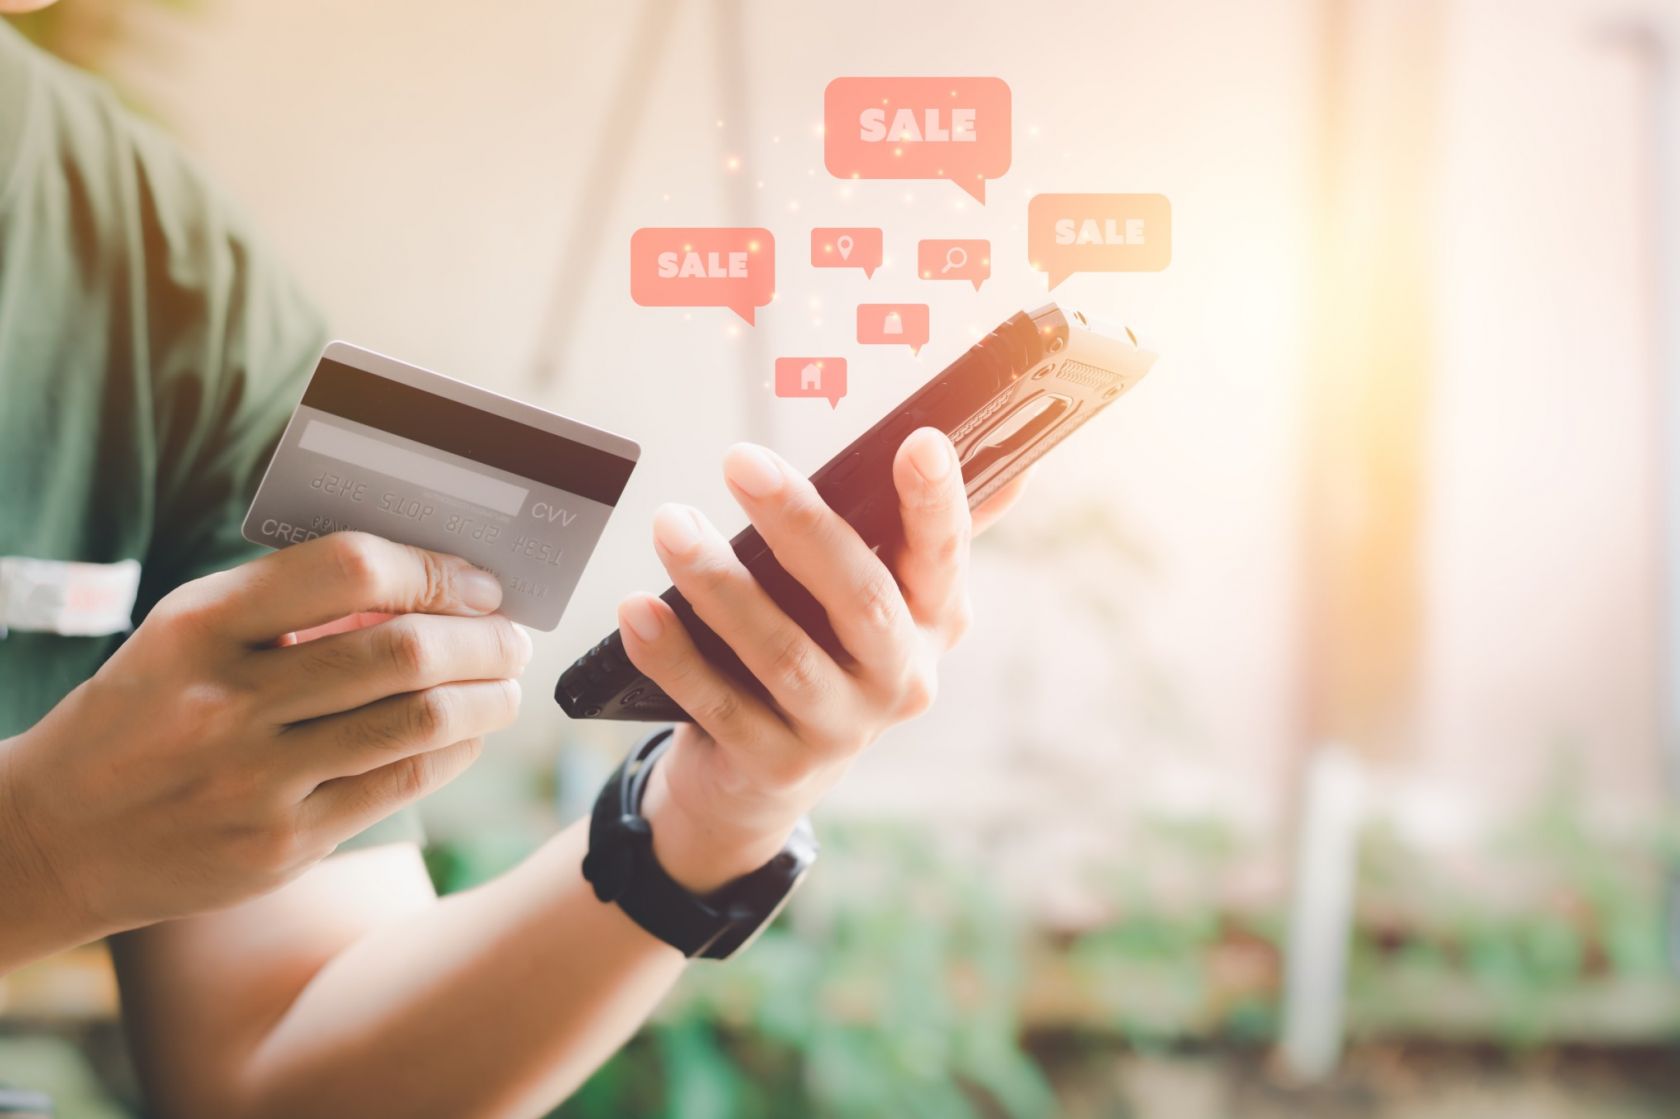 Pros and Cons of Mobile Commerce